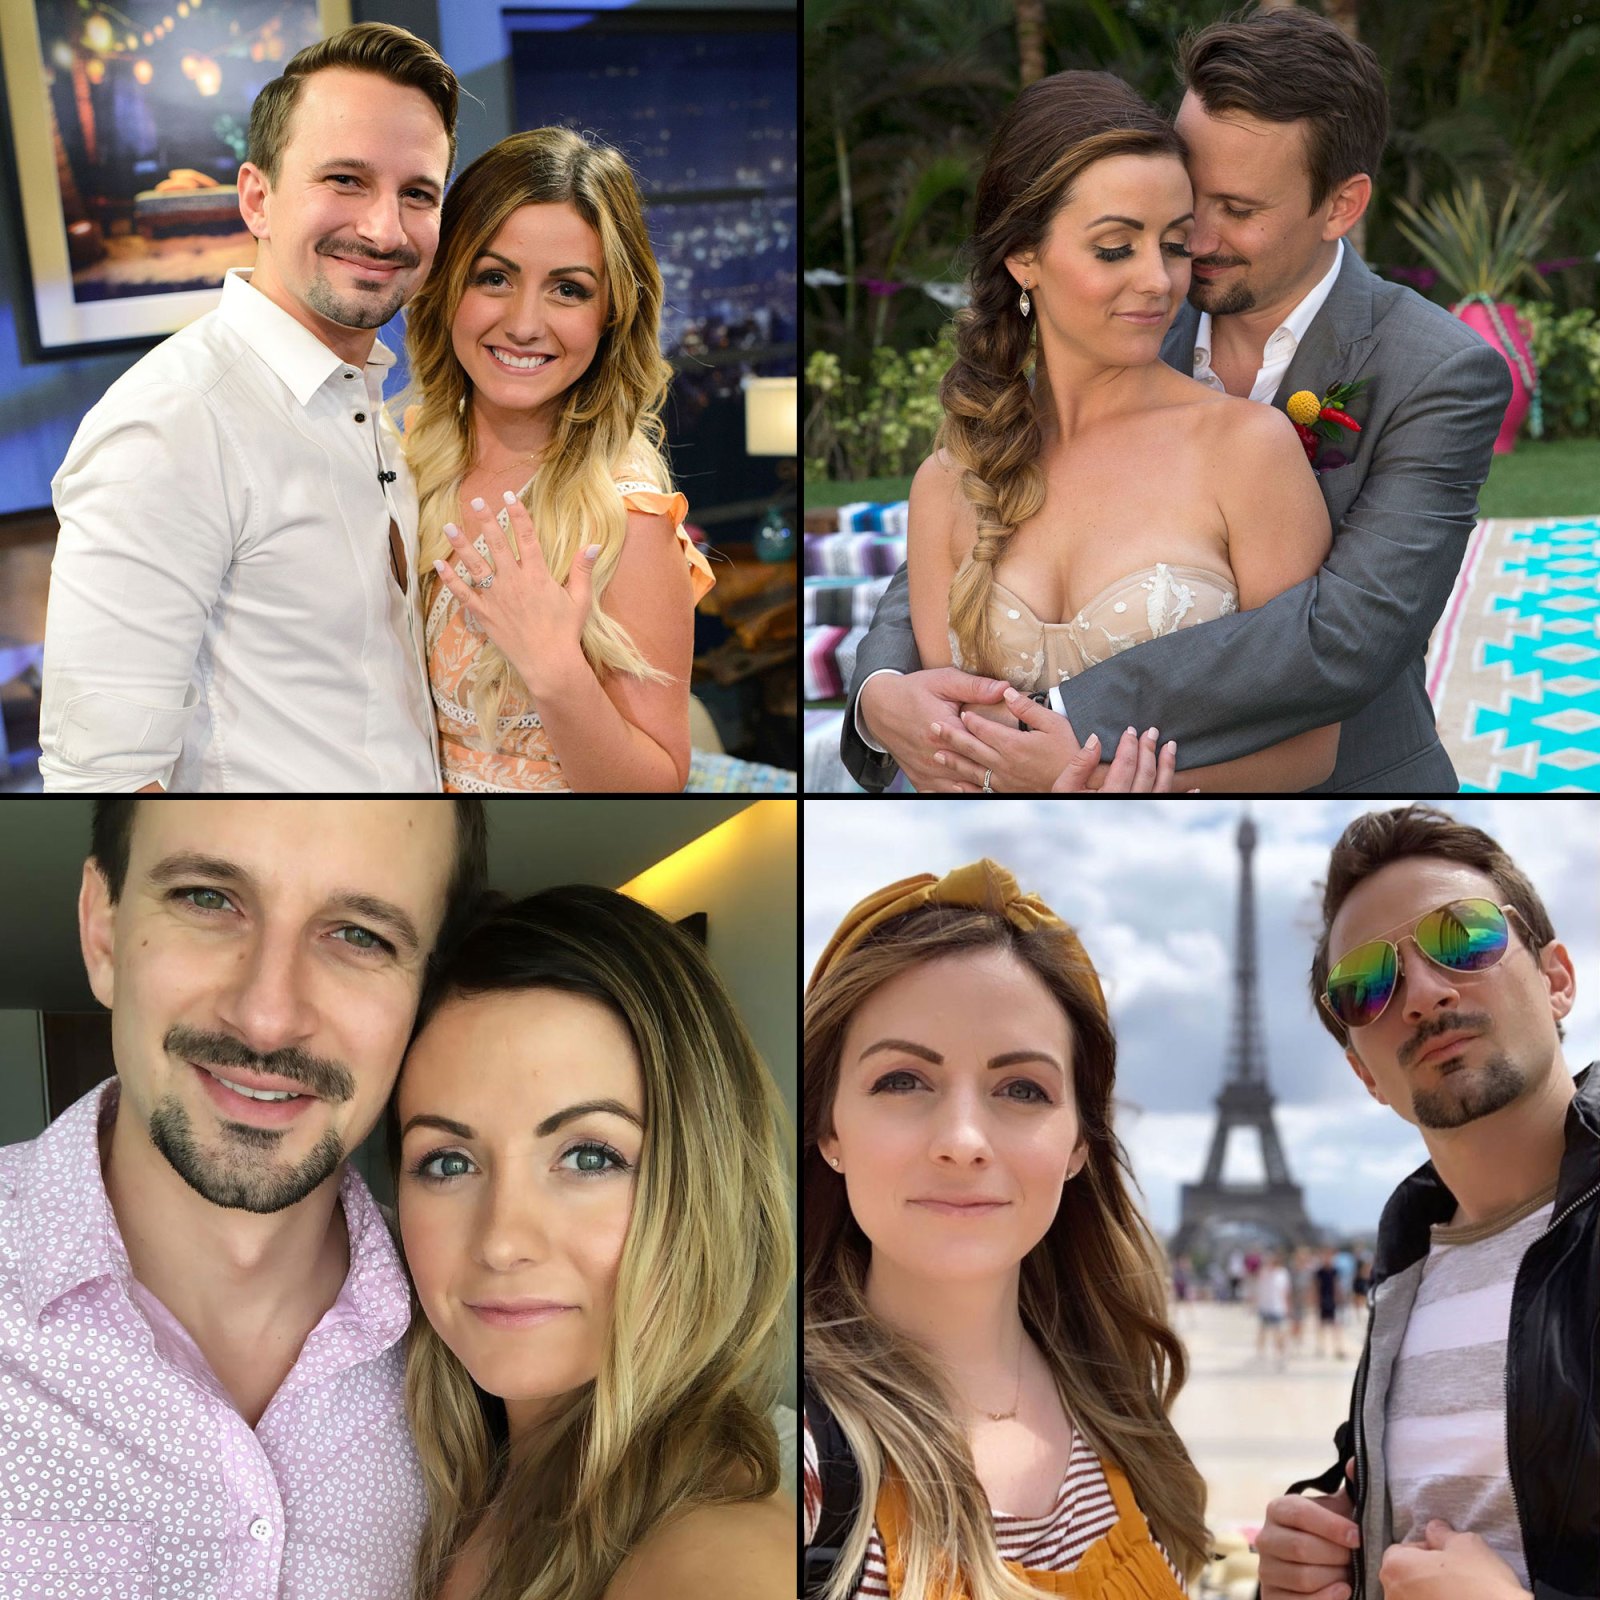 Bachelor in Paradise Carly Waddell and Evan Bass The Way They Were